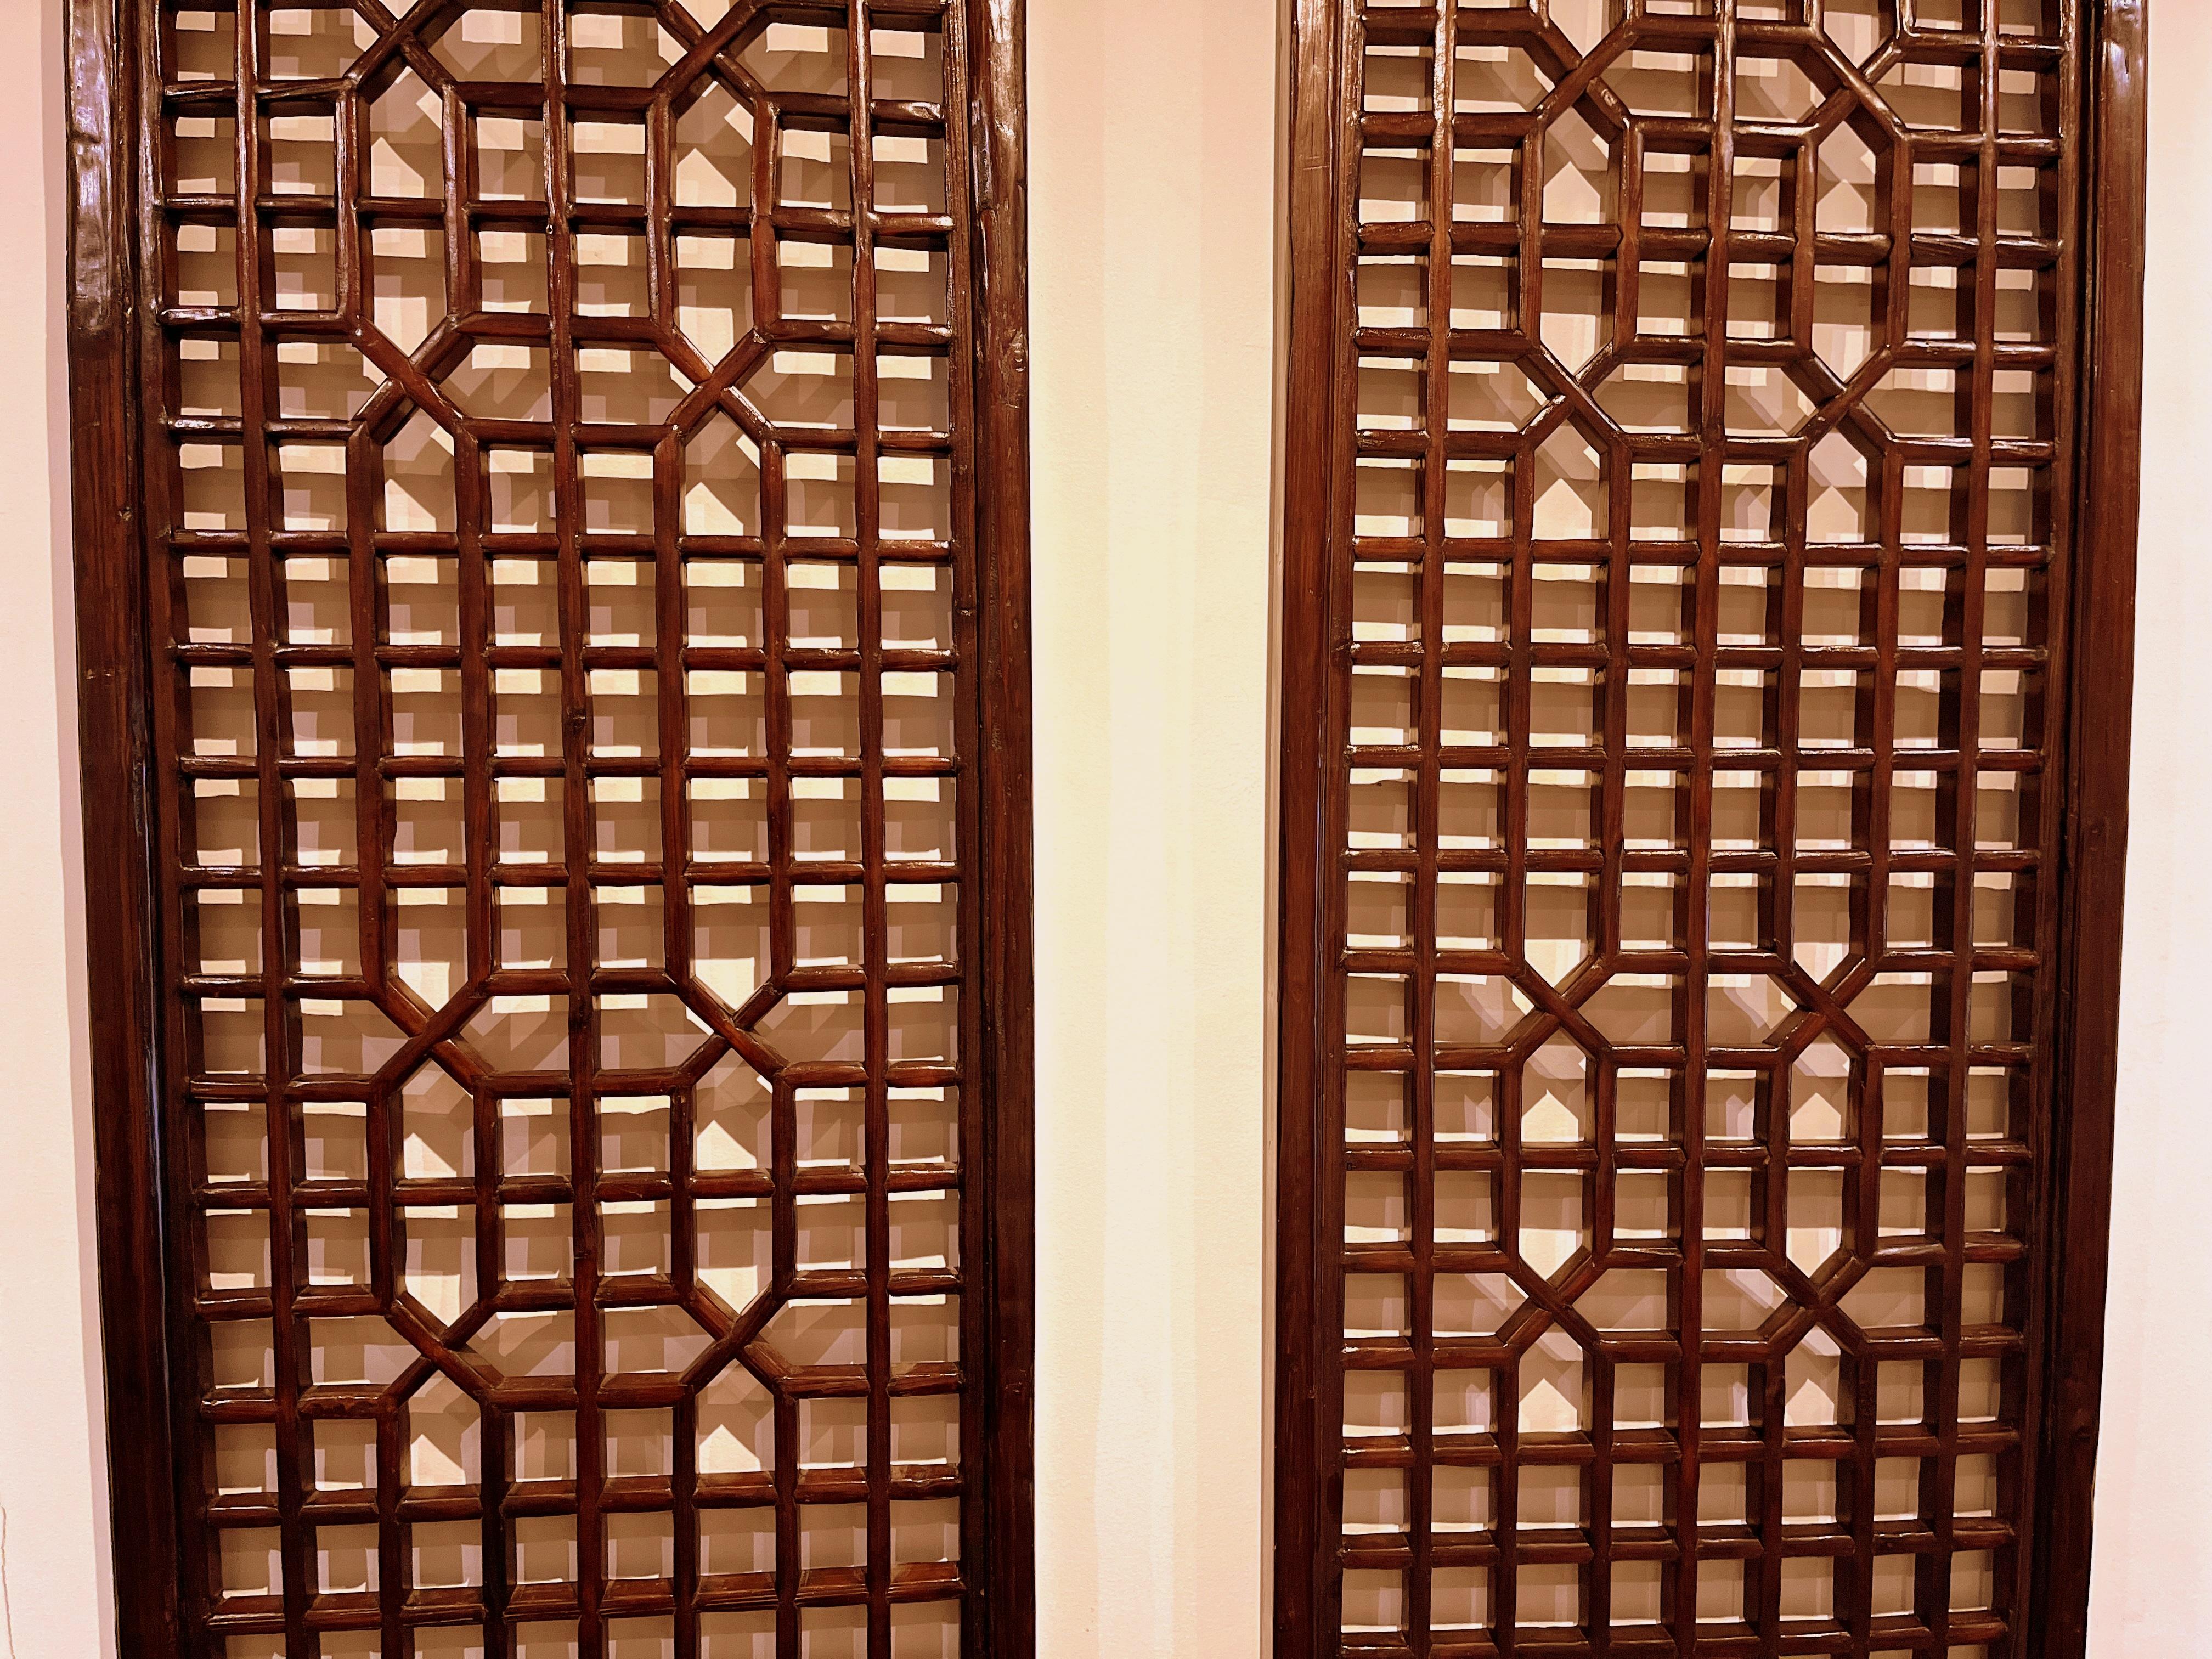 Polished Pair of Tall Asian Window Panels with Geometric Design